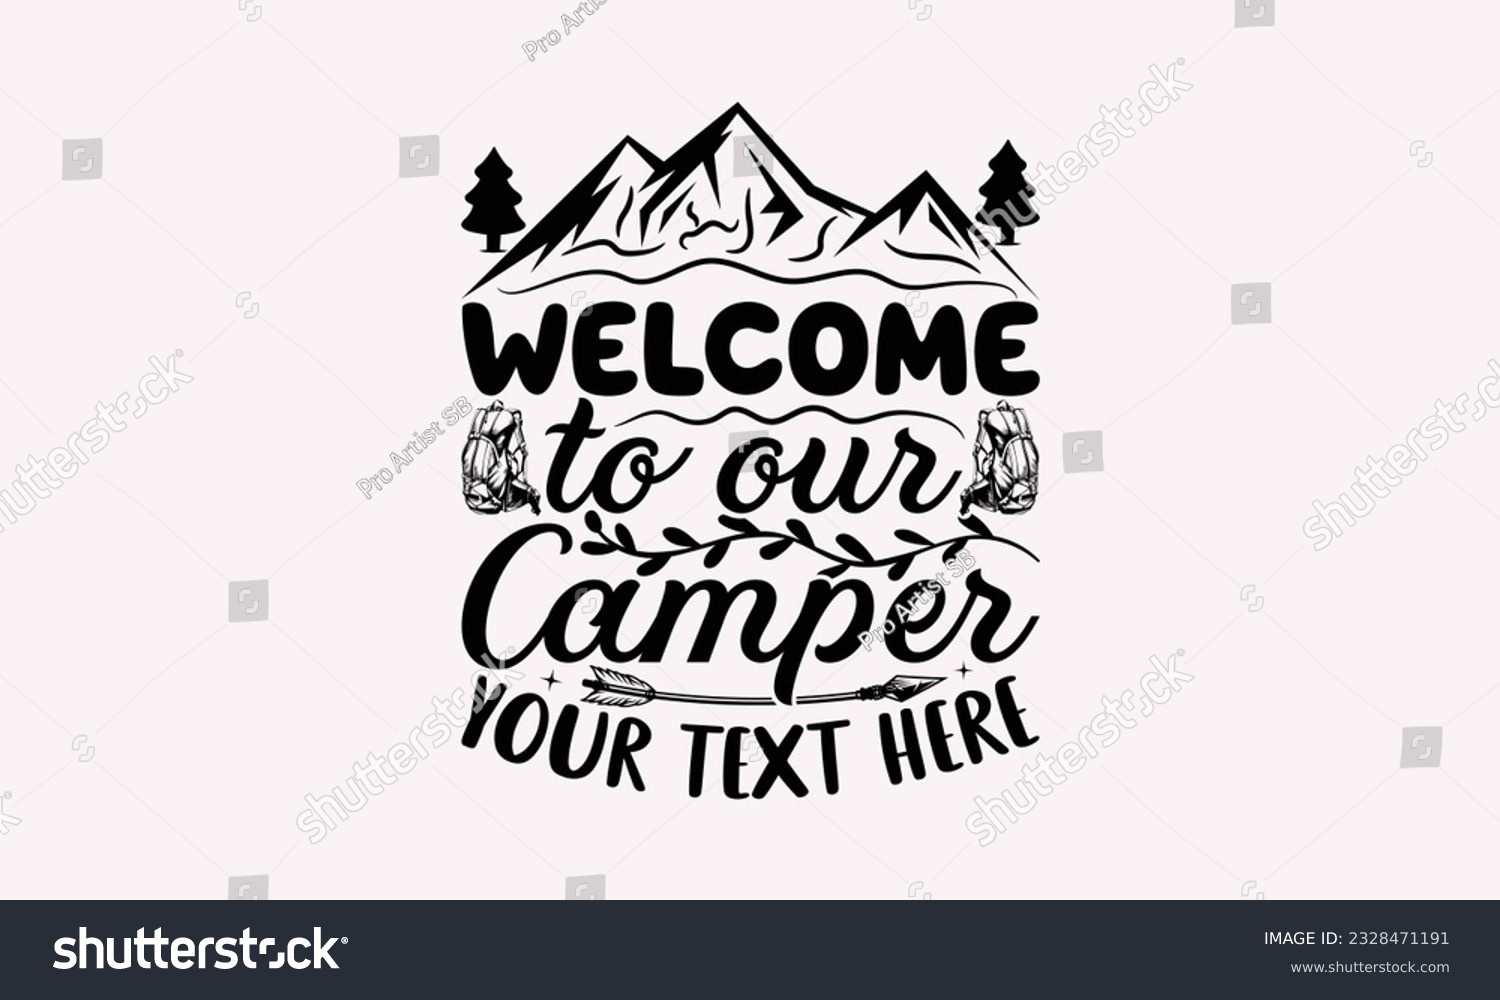 SVG of Welcome to our camper your text here - Camping SVG Design, Print on T-Shirts, Mugs, Birthday Cards, Wall Decals, Stickers, Birthday Party Decorations, Cuts and More Use. svg